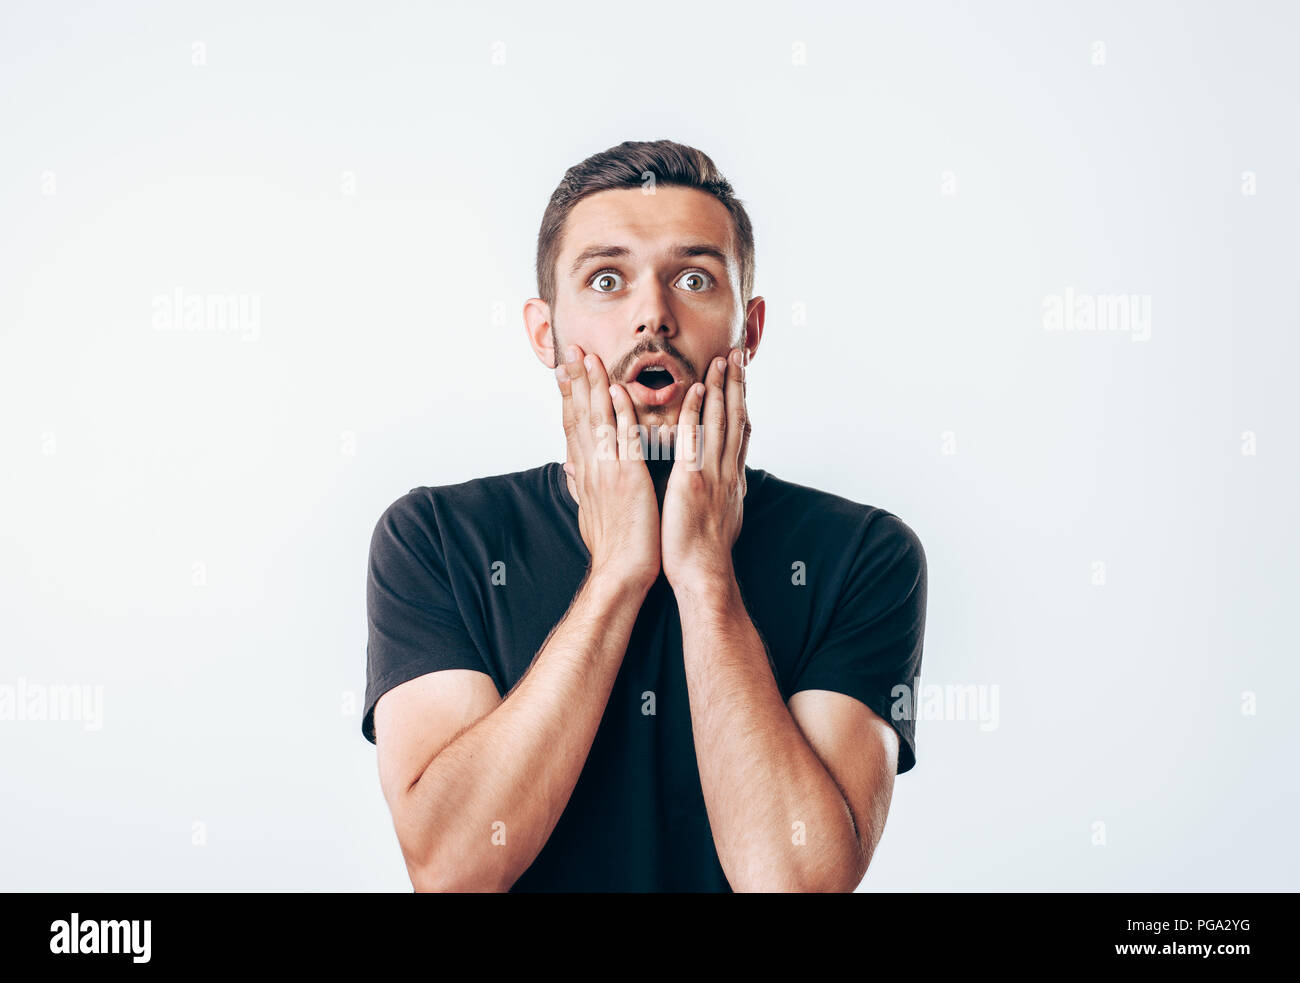 Portrait of young surprised man. People emotion facial expression Stock Photo